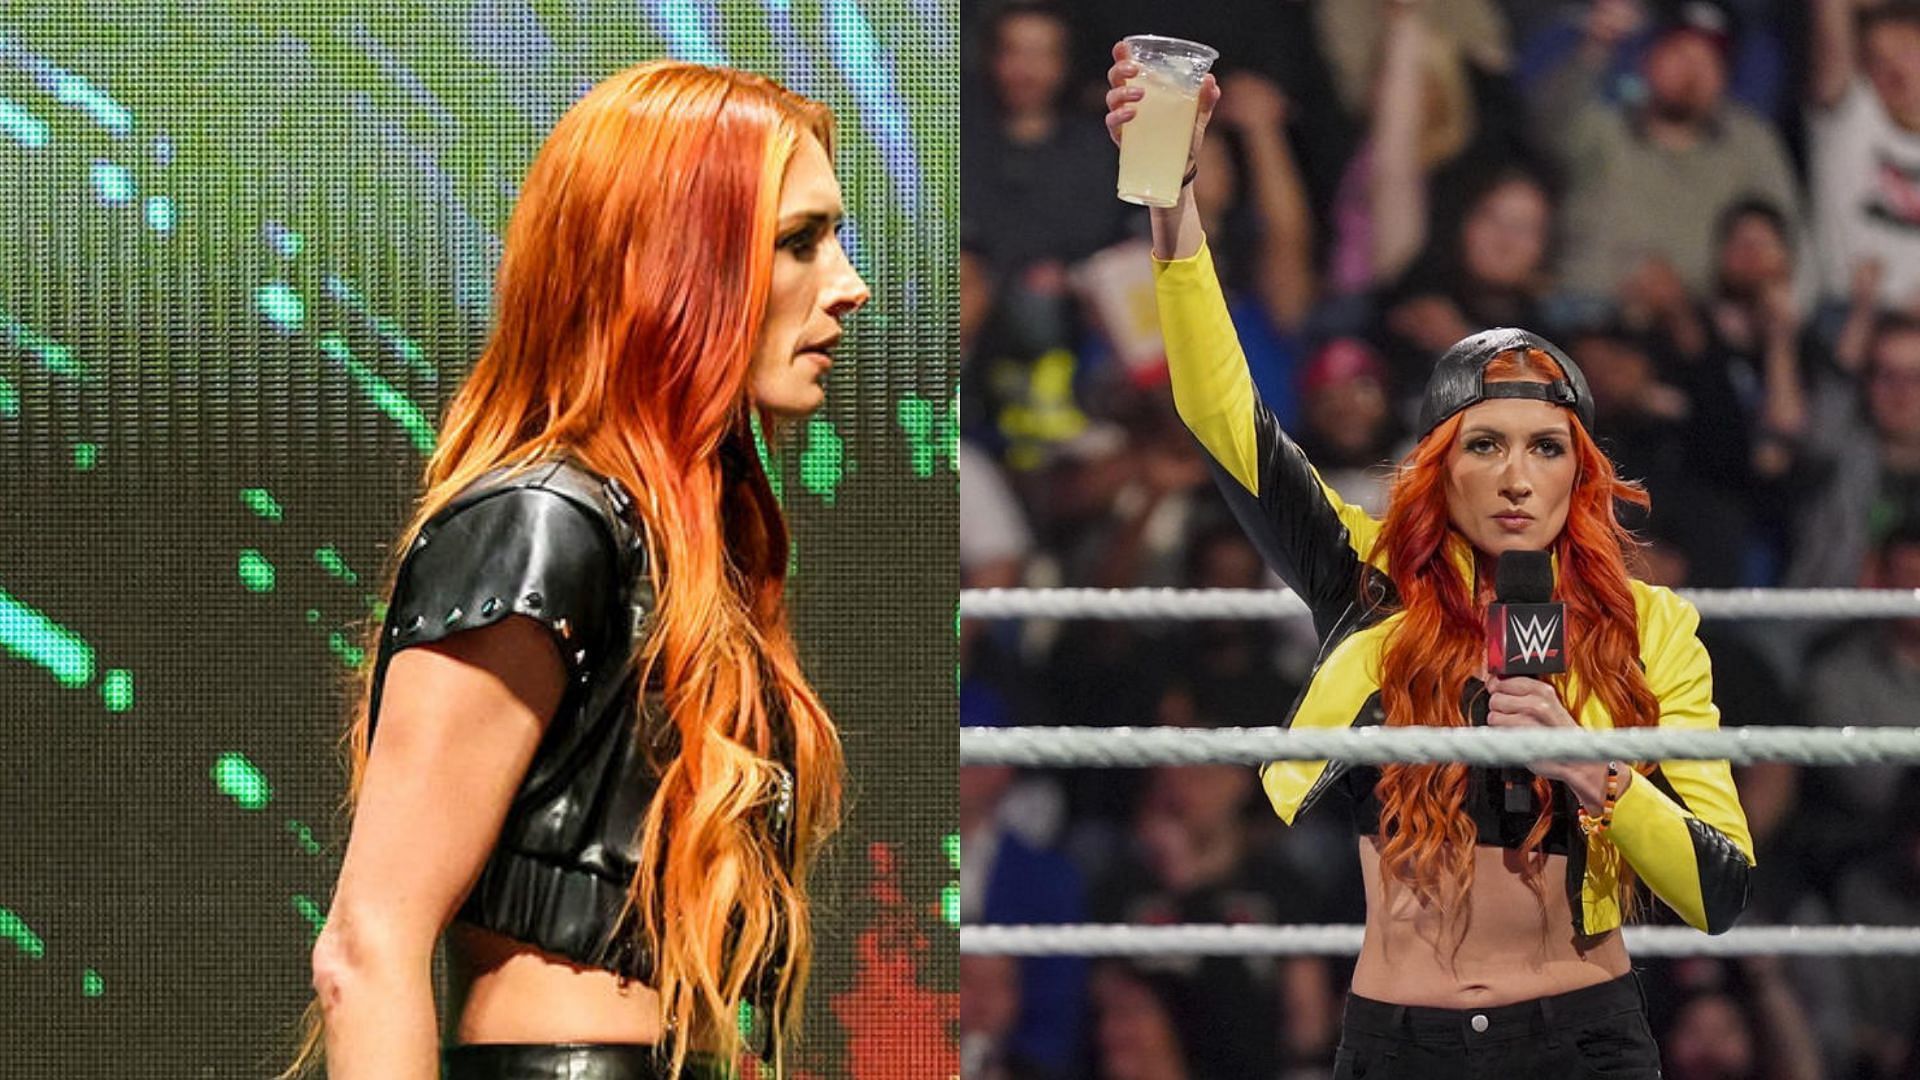 Becky Lynch will compete in the Women